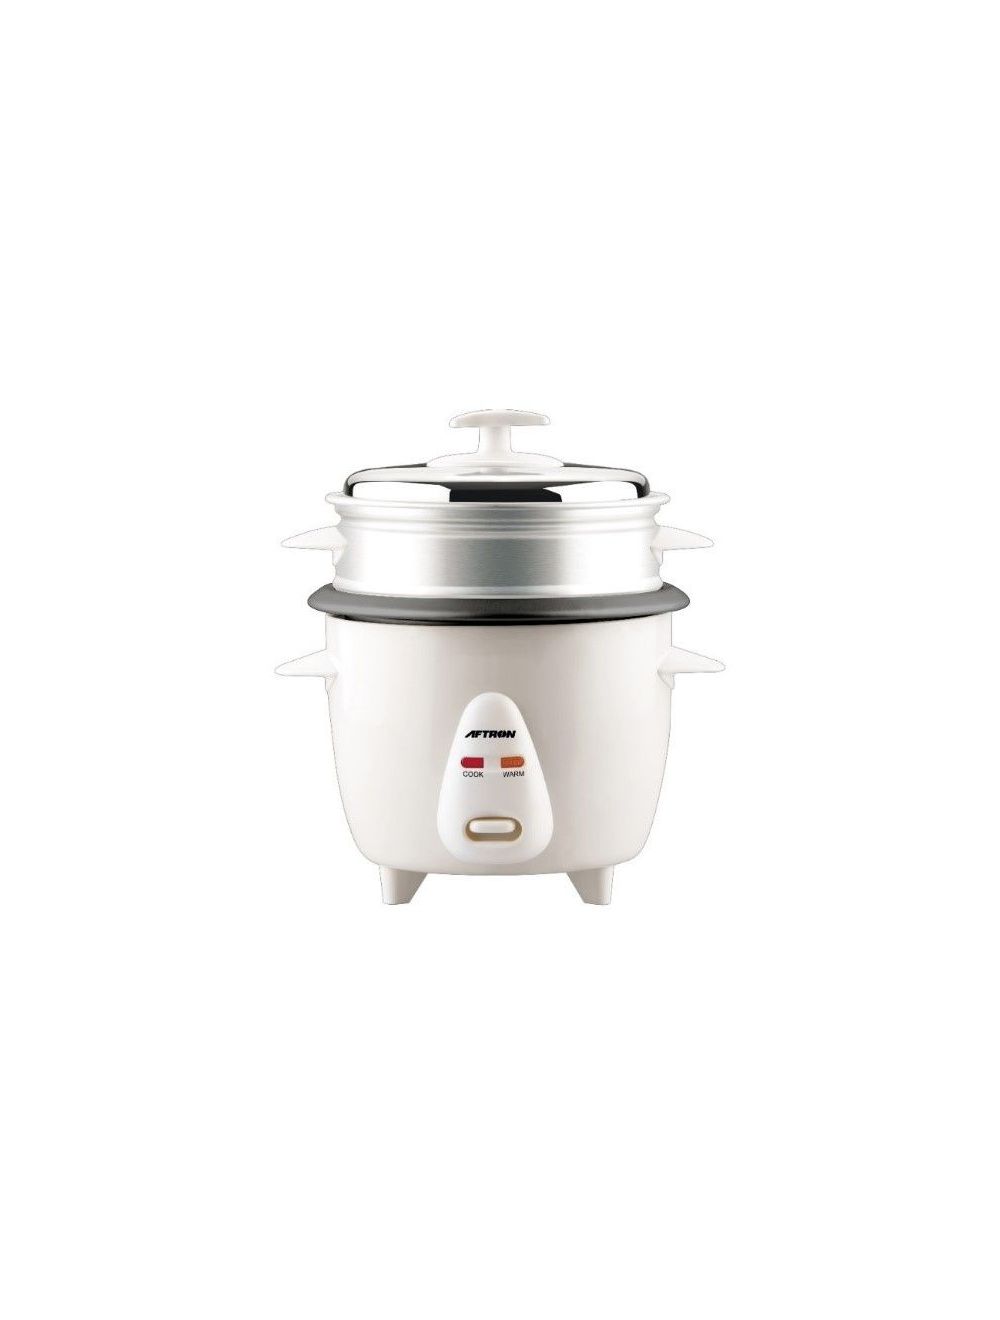 Aftron 1 L Rice Cooker, White -AFRC1000N